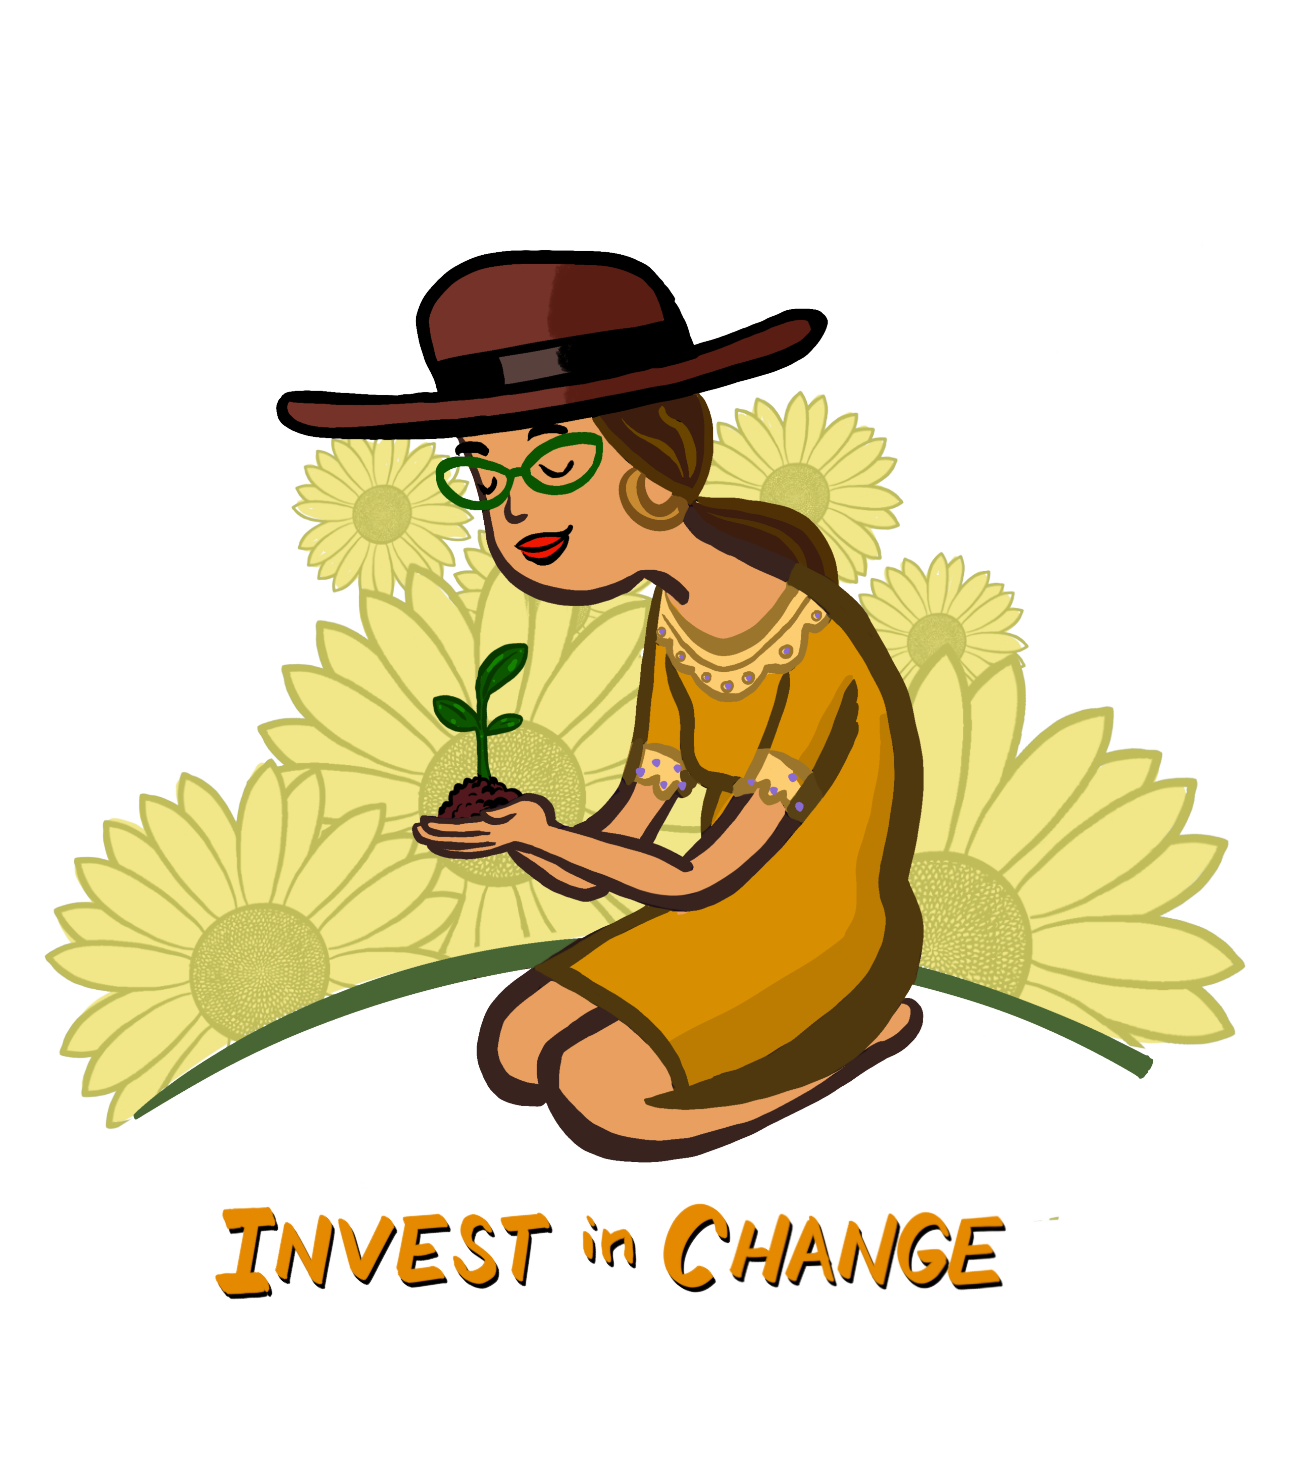 Invest in Change